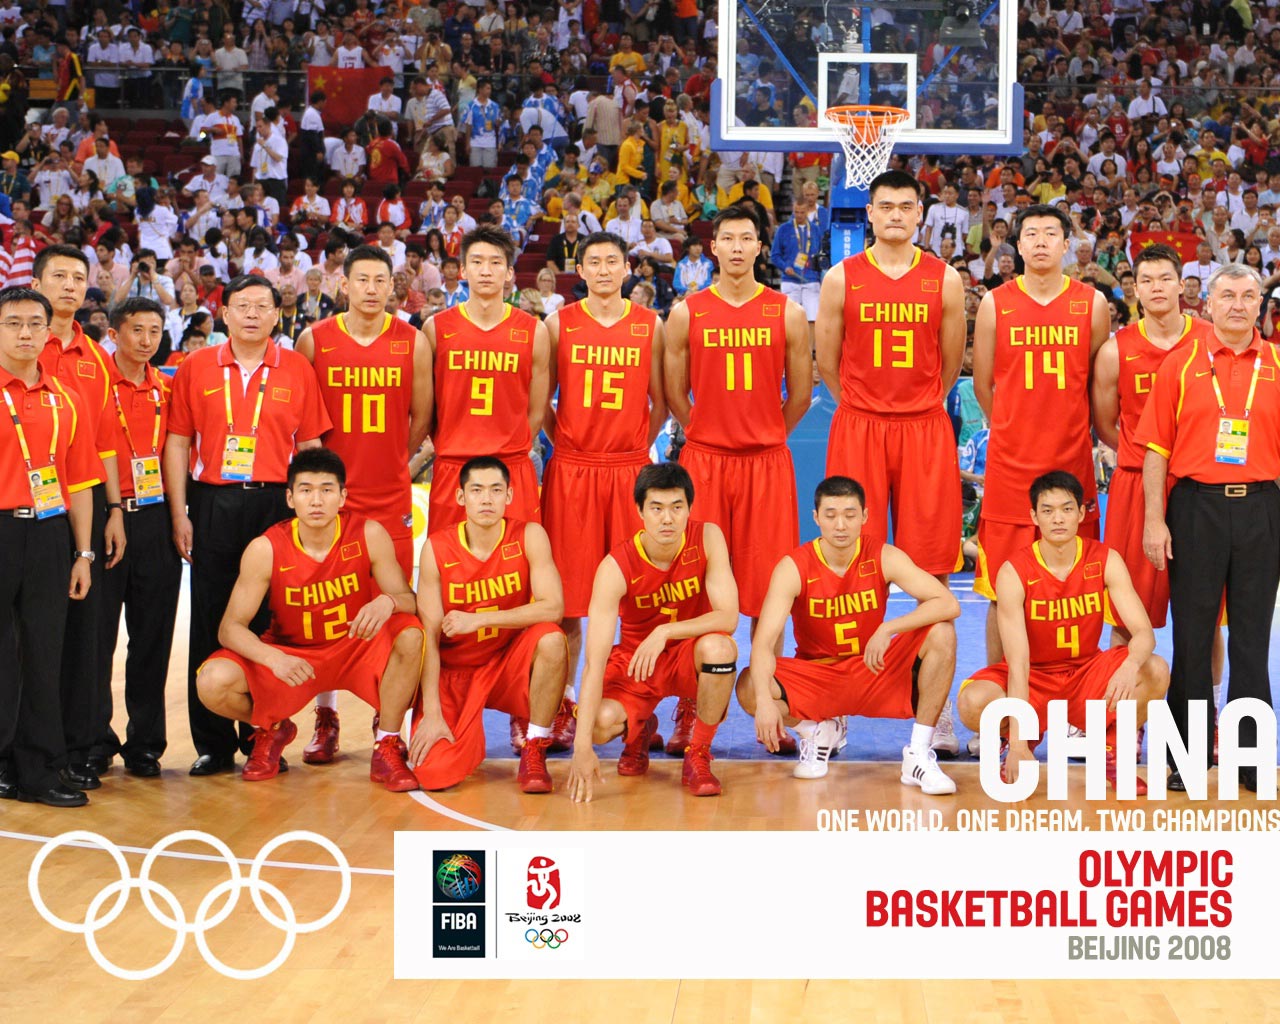 Next is wallpaper of basketball team of China who are host country of 2008 